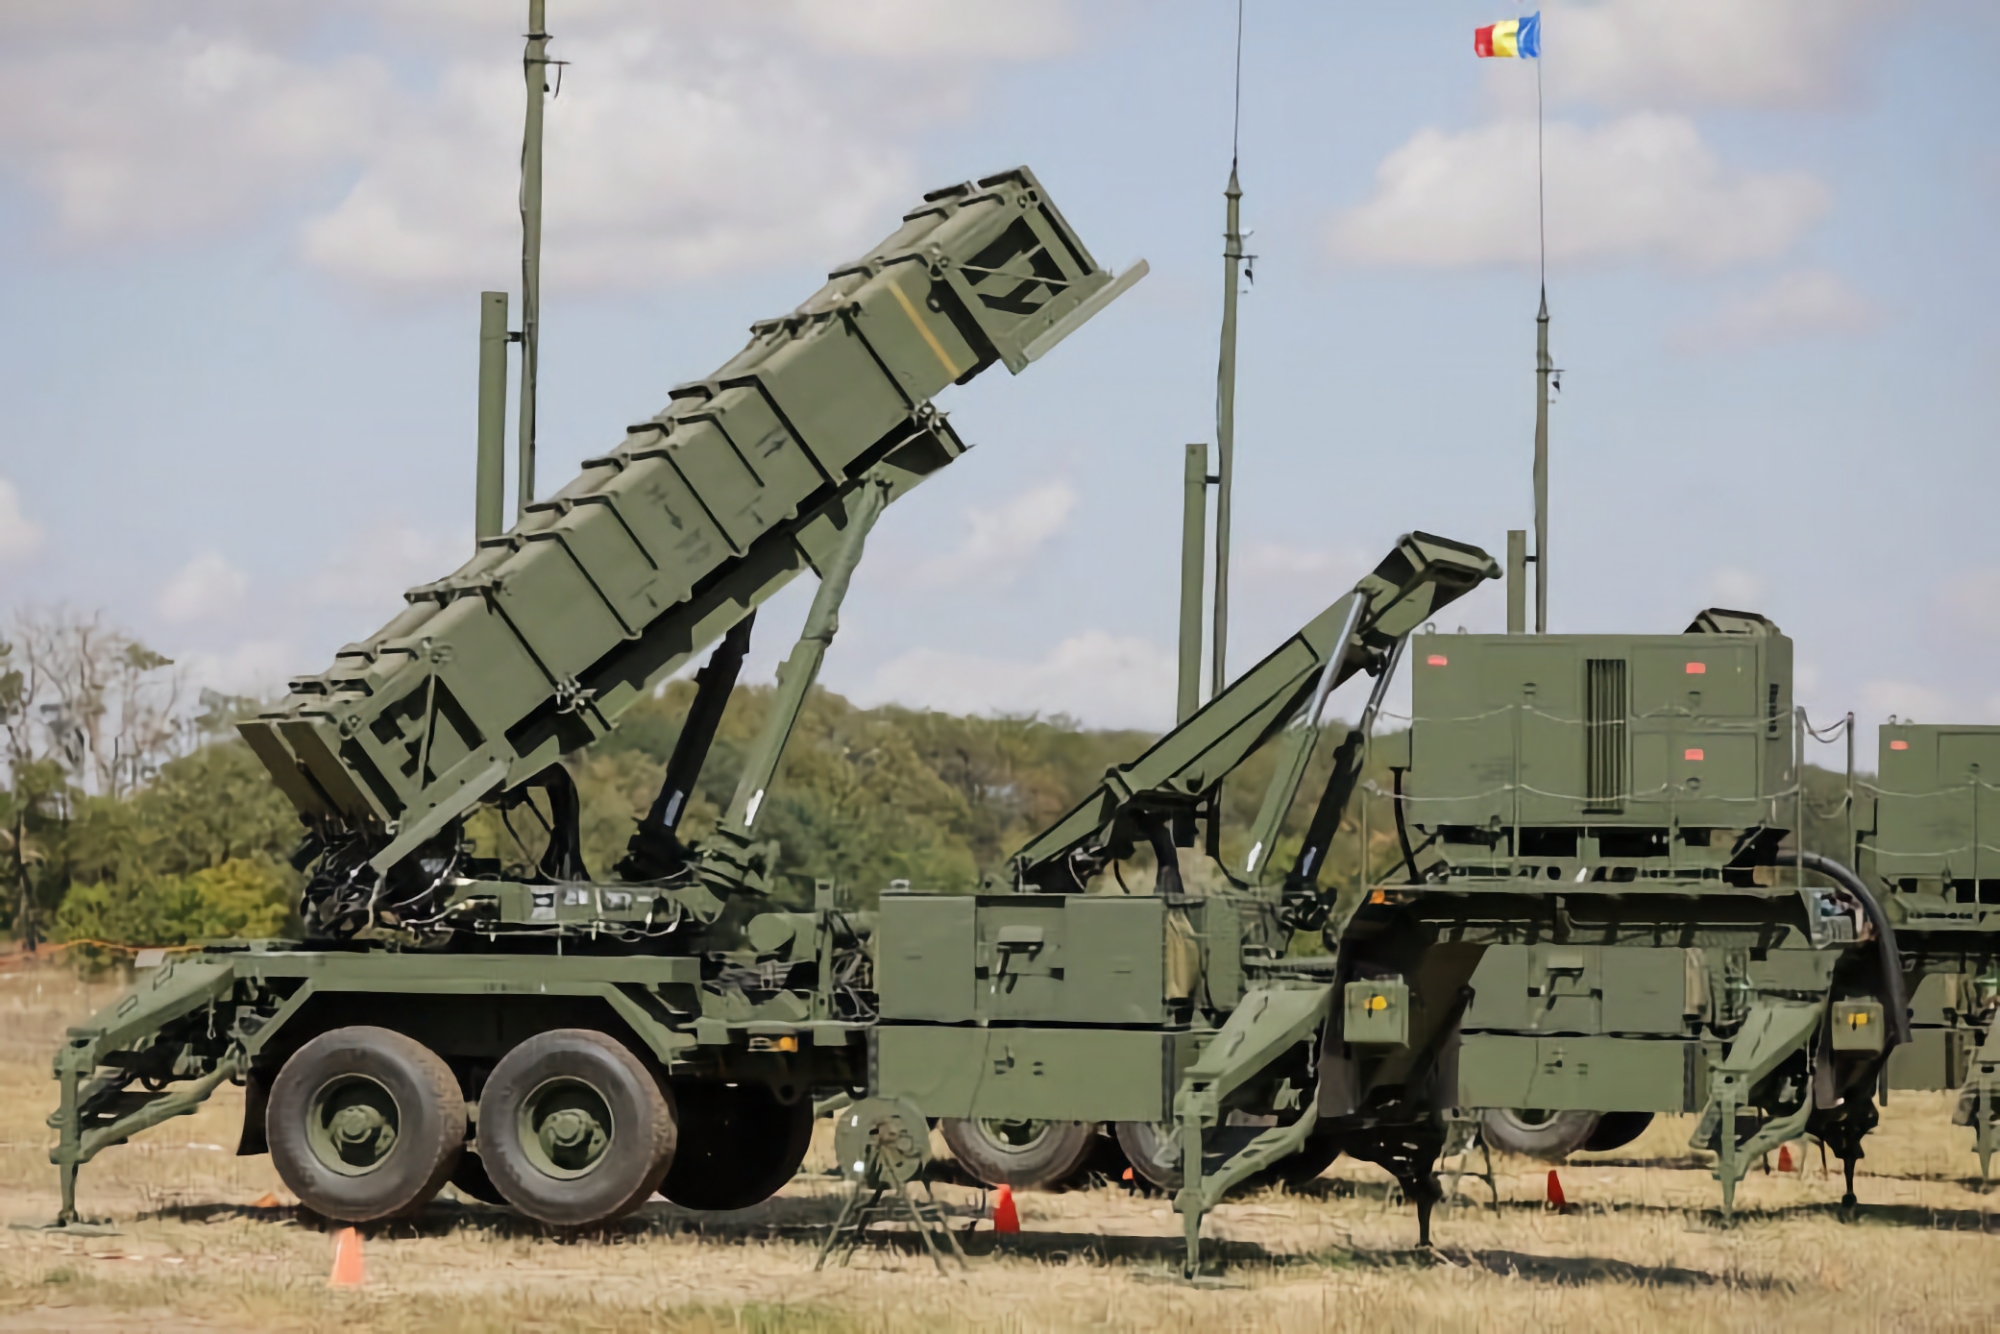 Romania to consider transferring Patriot surface-to-air missile system to Ukraine